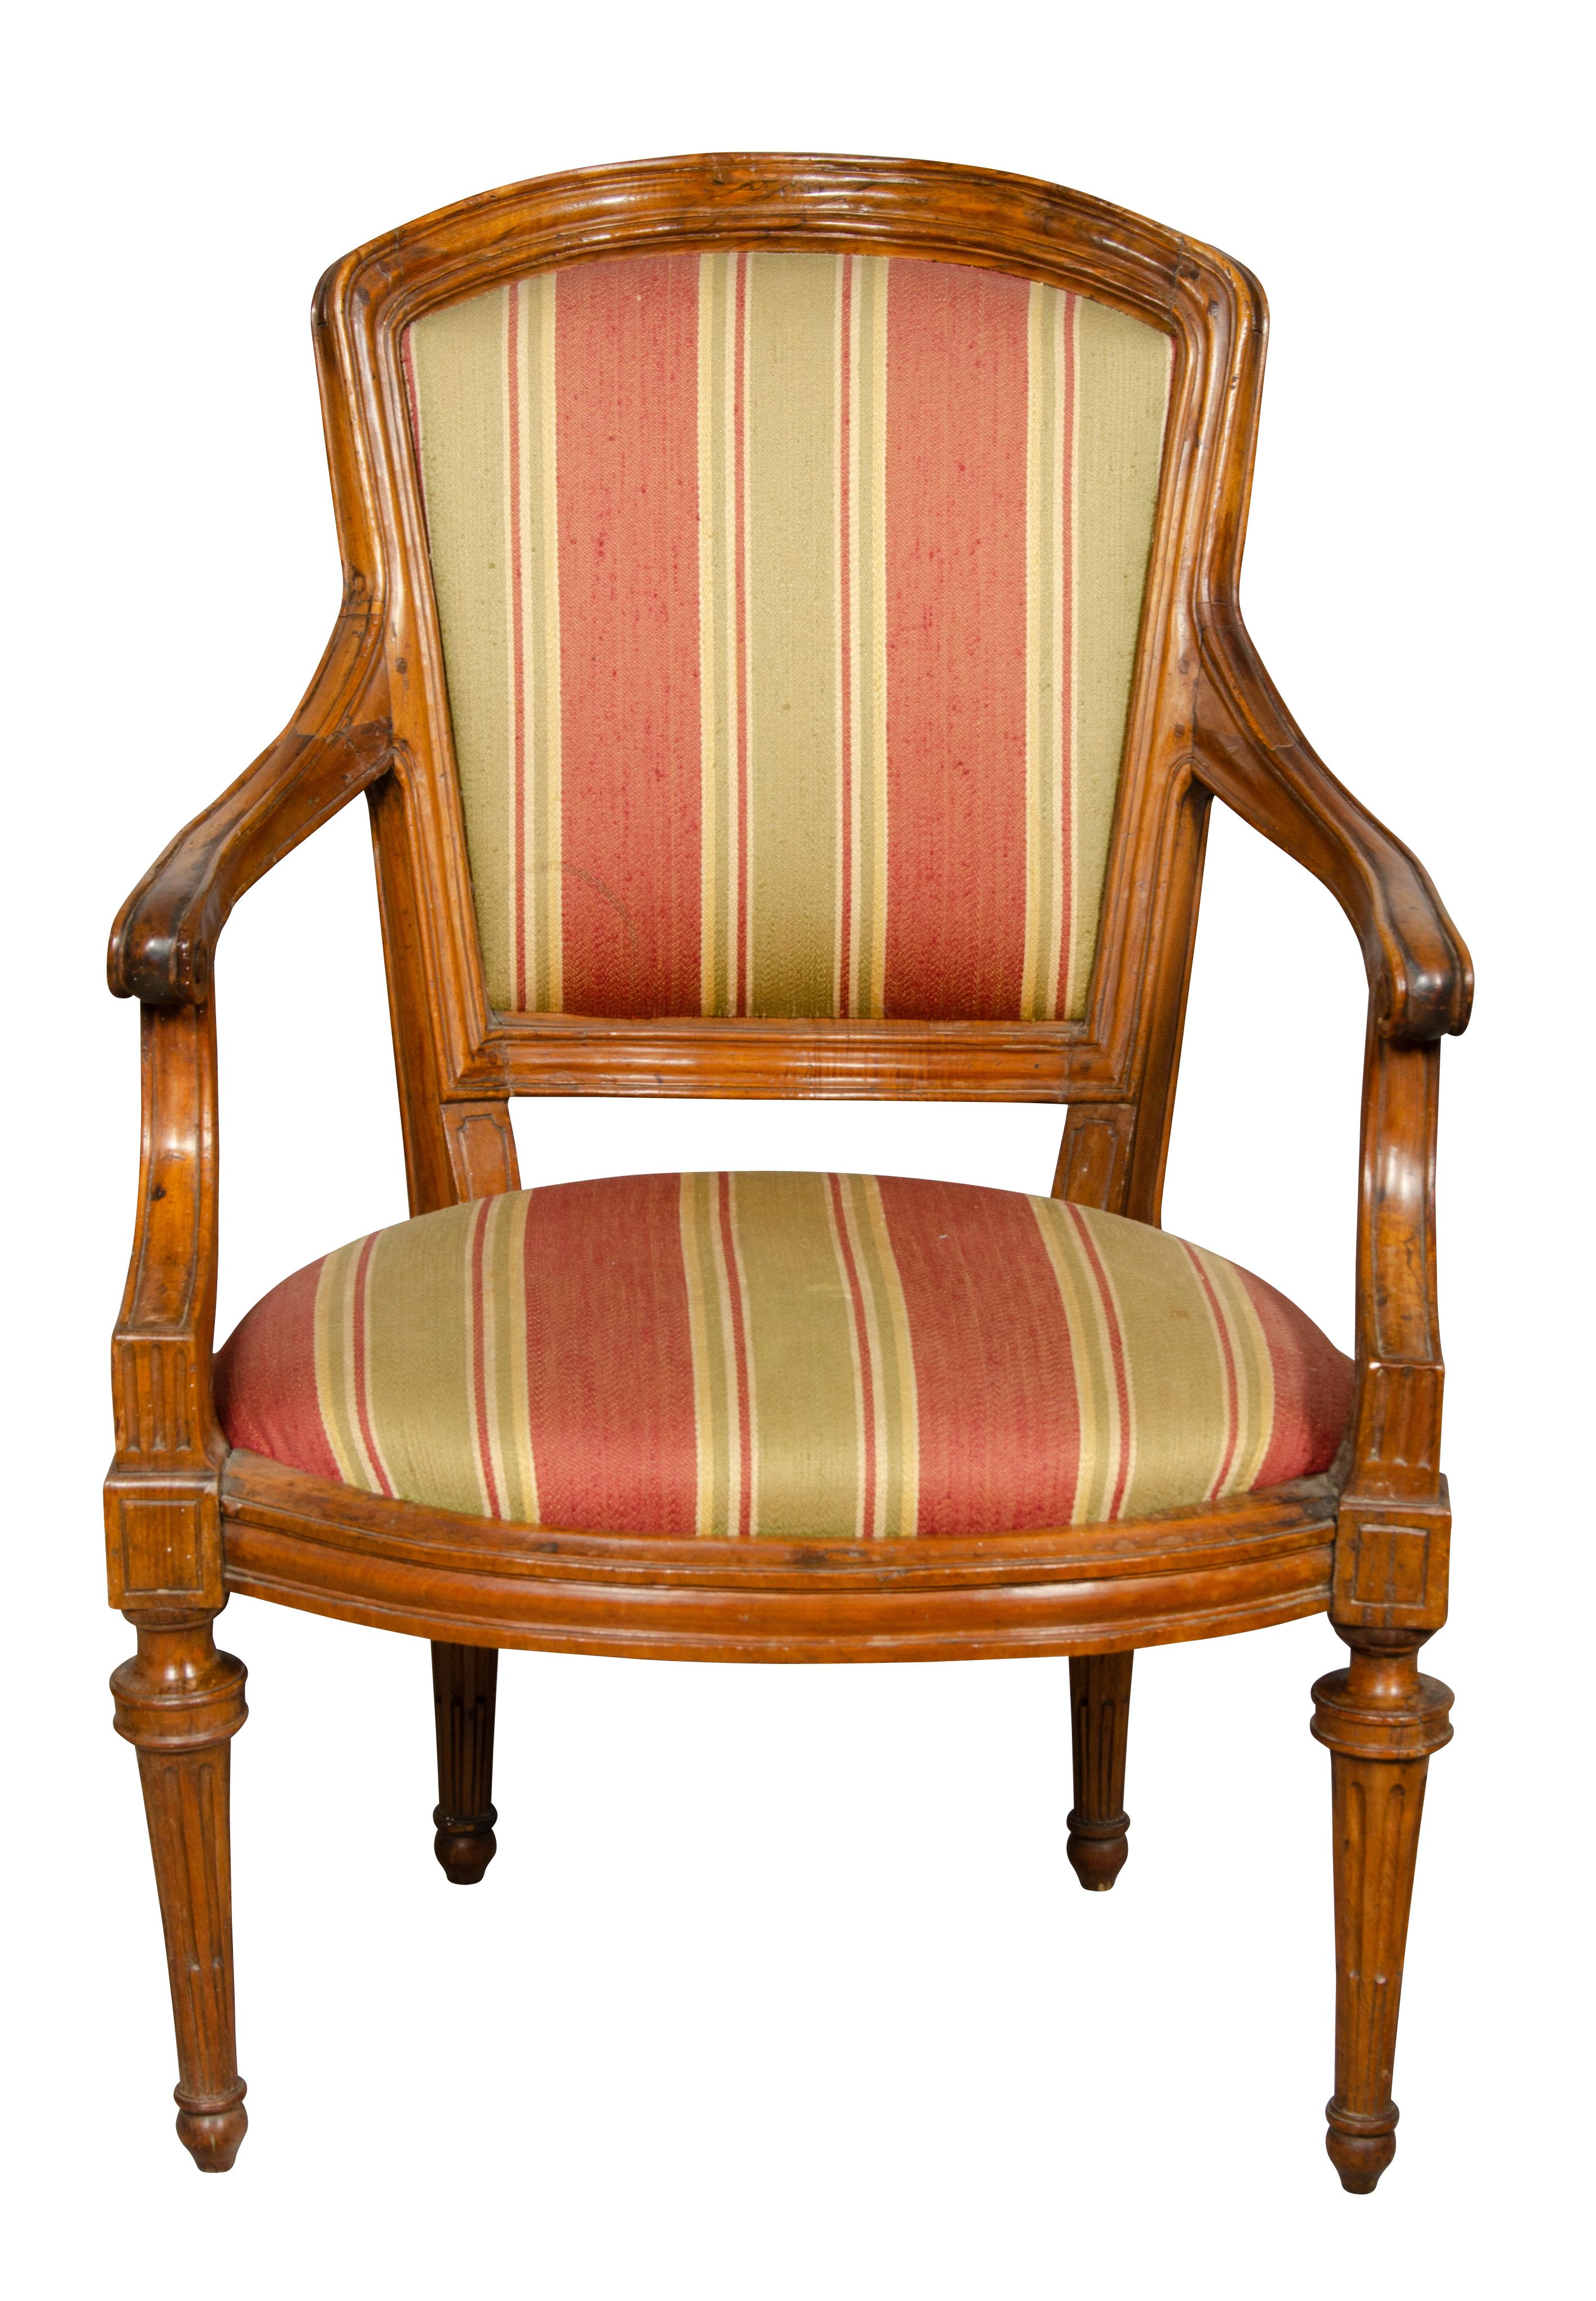 Arched back and downswept arms raised on circular tapered stop fluted legs. Nicely molded and carved frame with detachable seat and back for easy reupholstery.